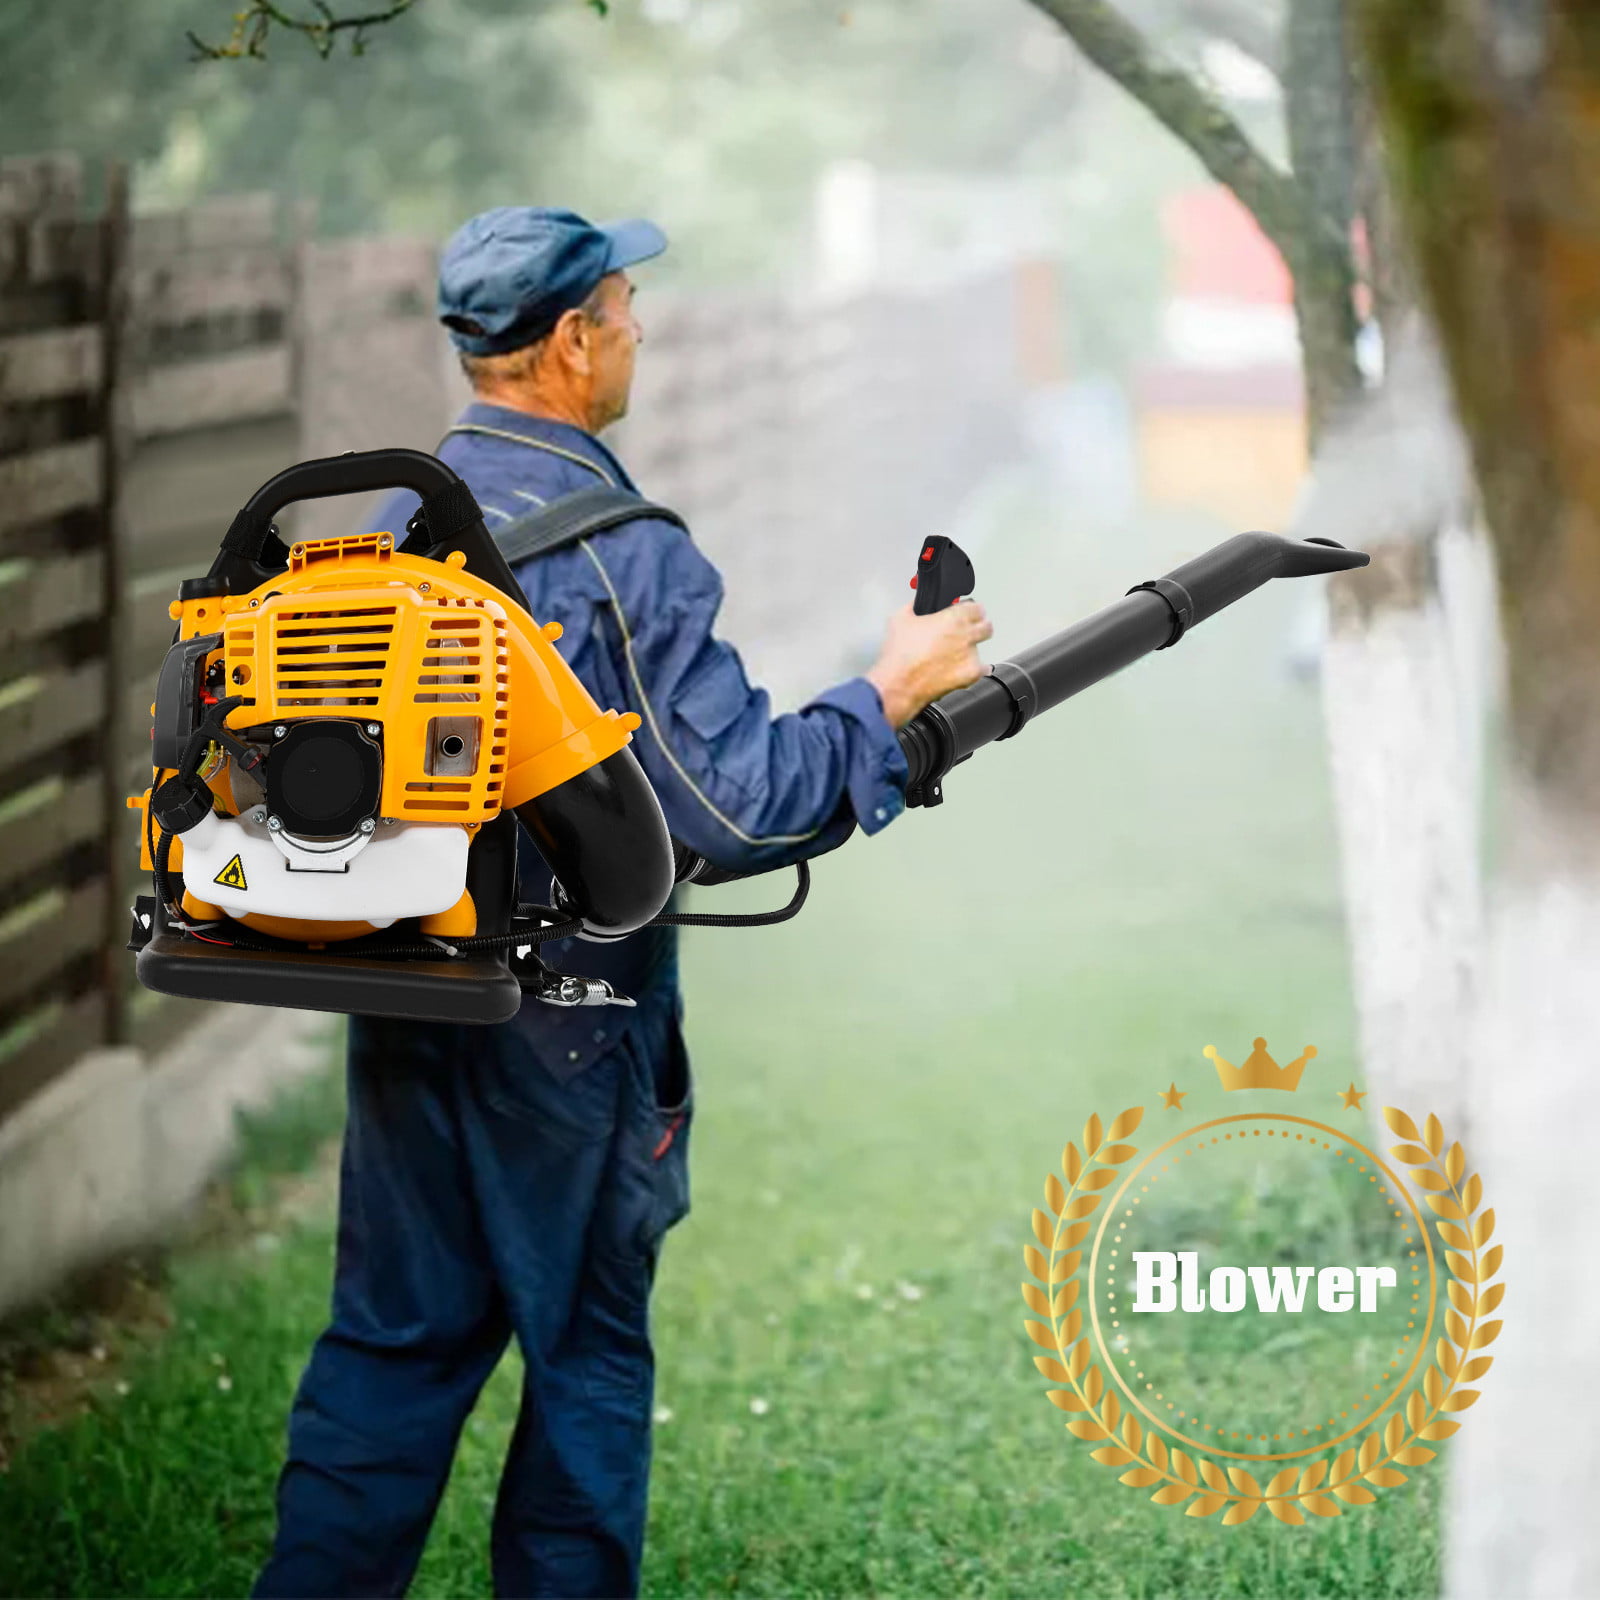 Details about   80CC 2-Stroke Backpack Powerful Blower Leaf Blower Motor Gas 850CFM Yellow NEW 